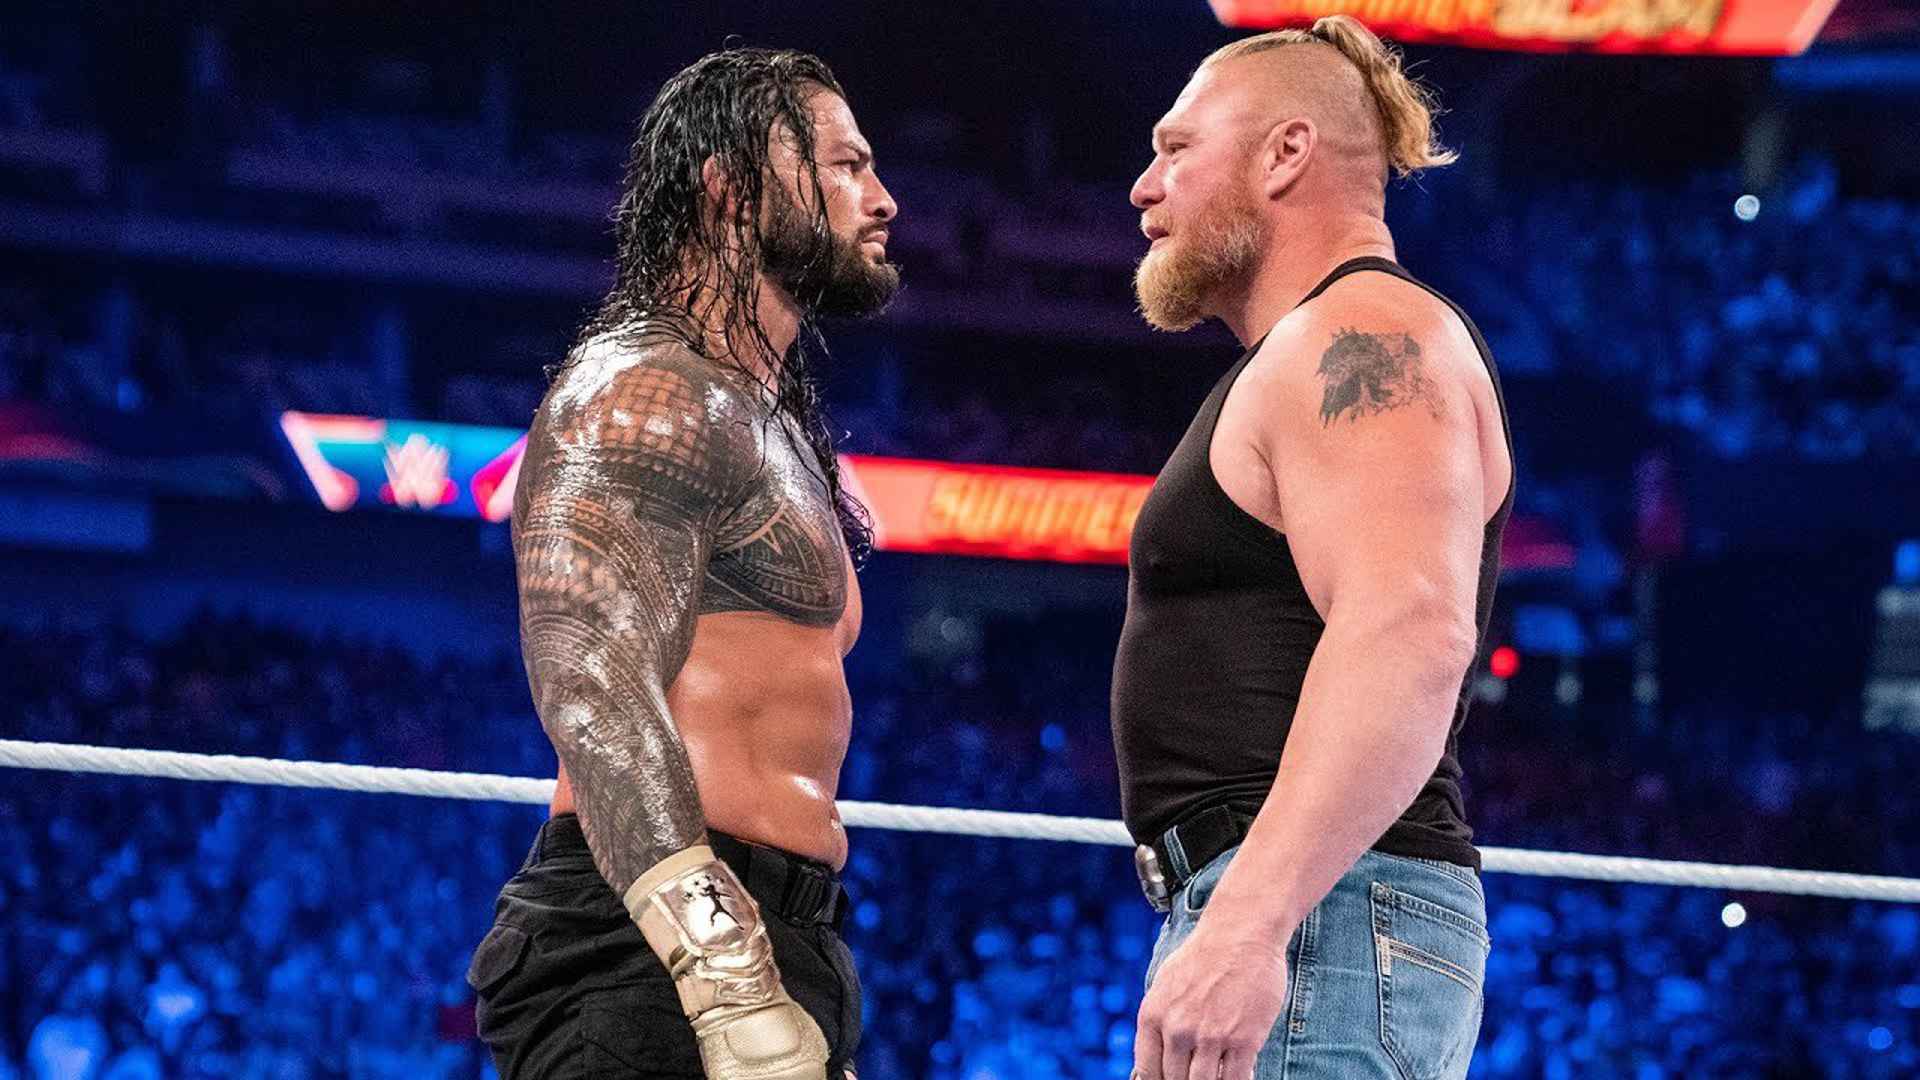 Roman Reigns vs Brock Lesnar and other rivalries in WWE Sportslumo